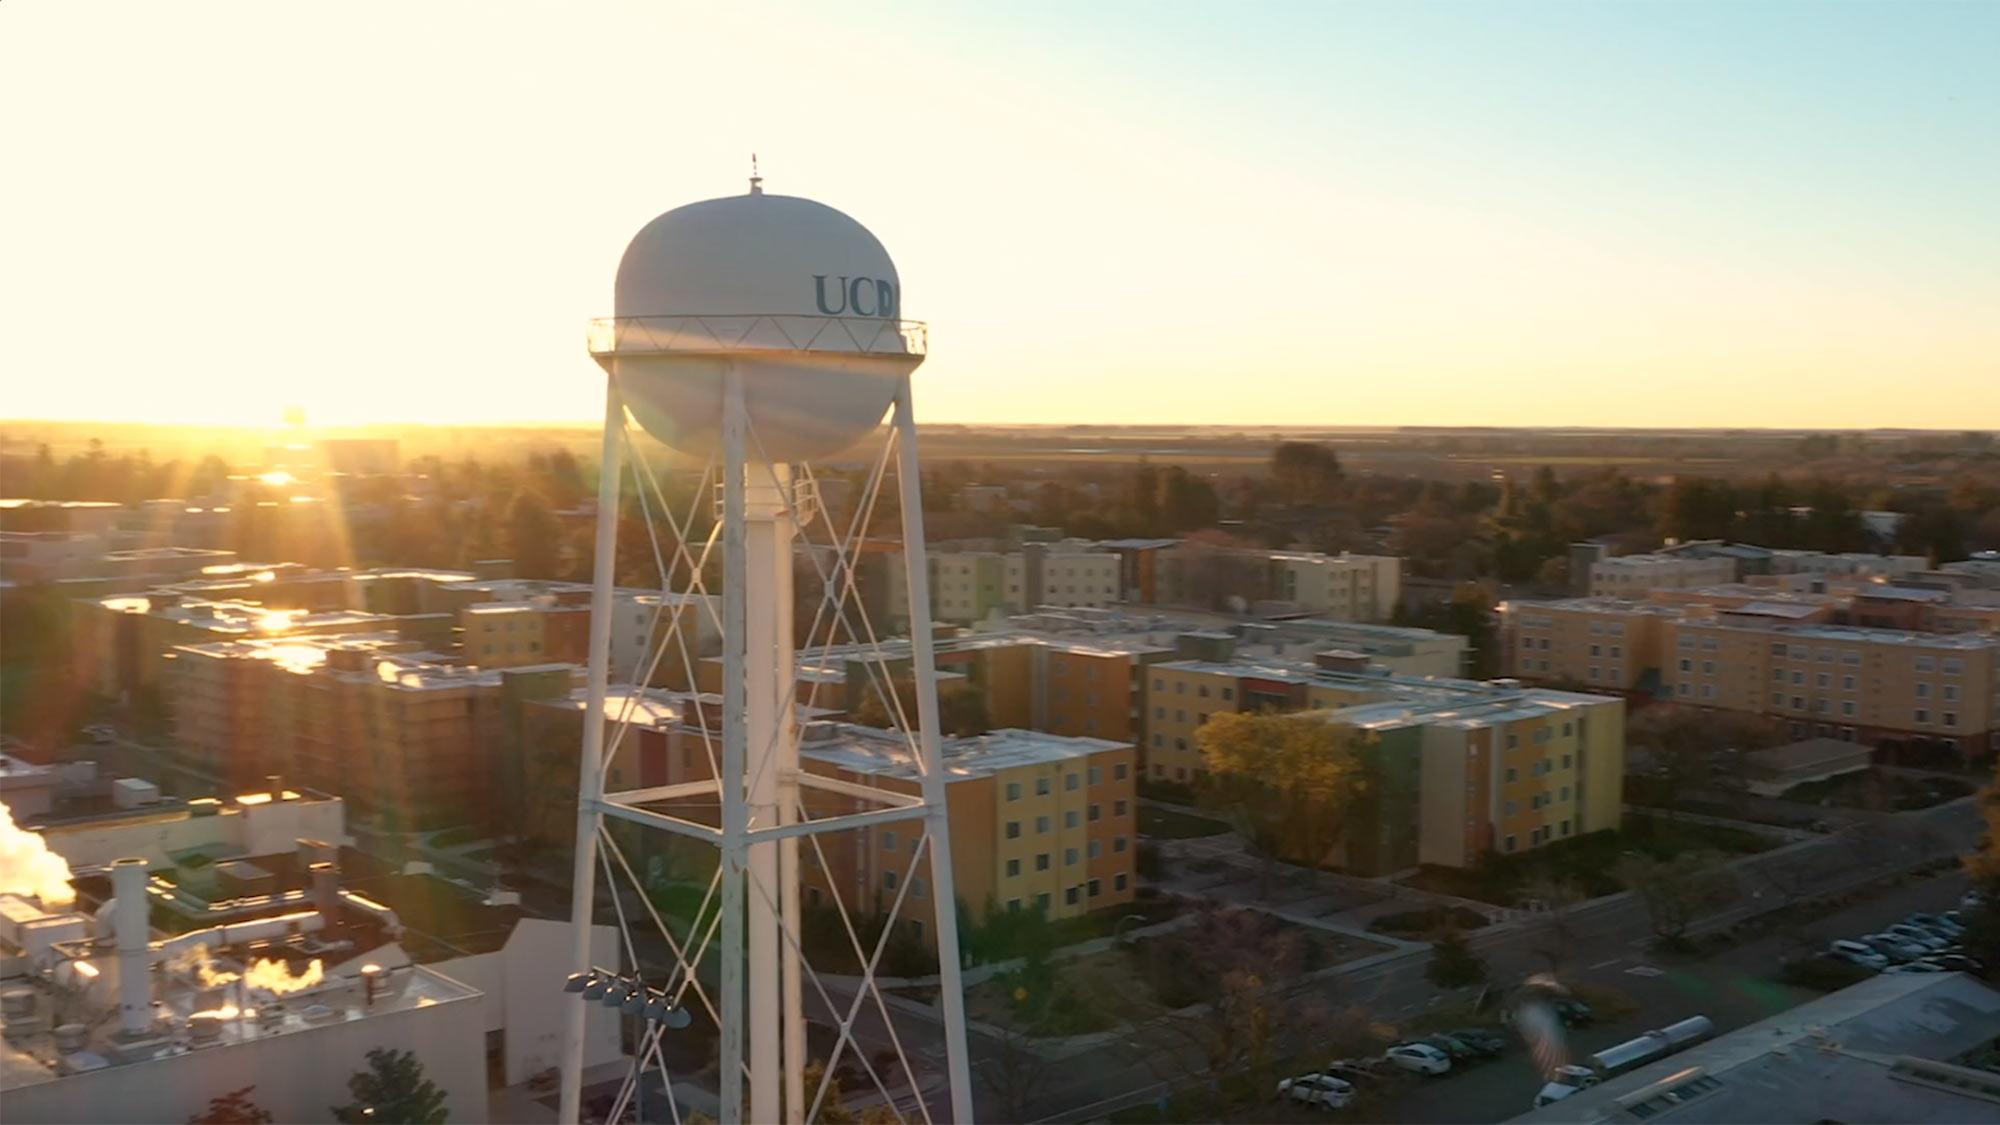 First frame of the UC Davis drone video featuring the water tower at UC Davis